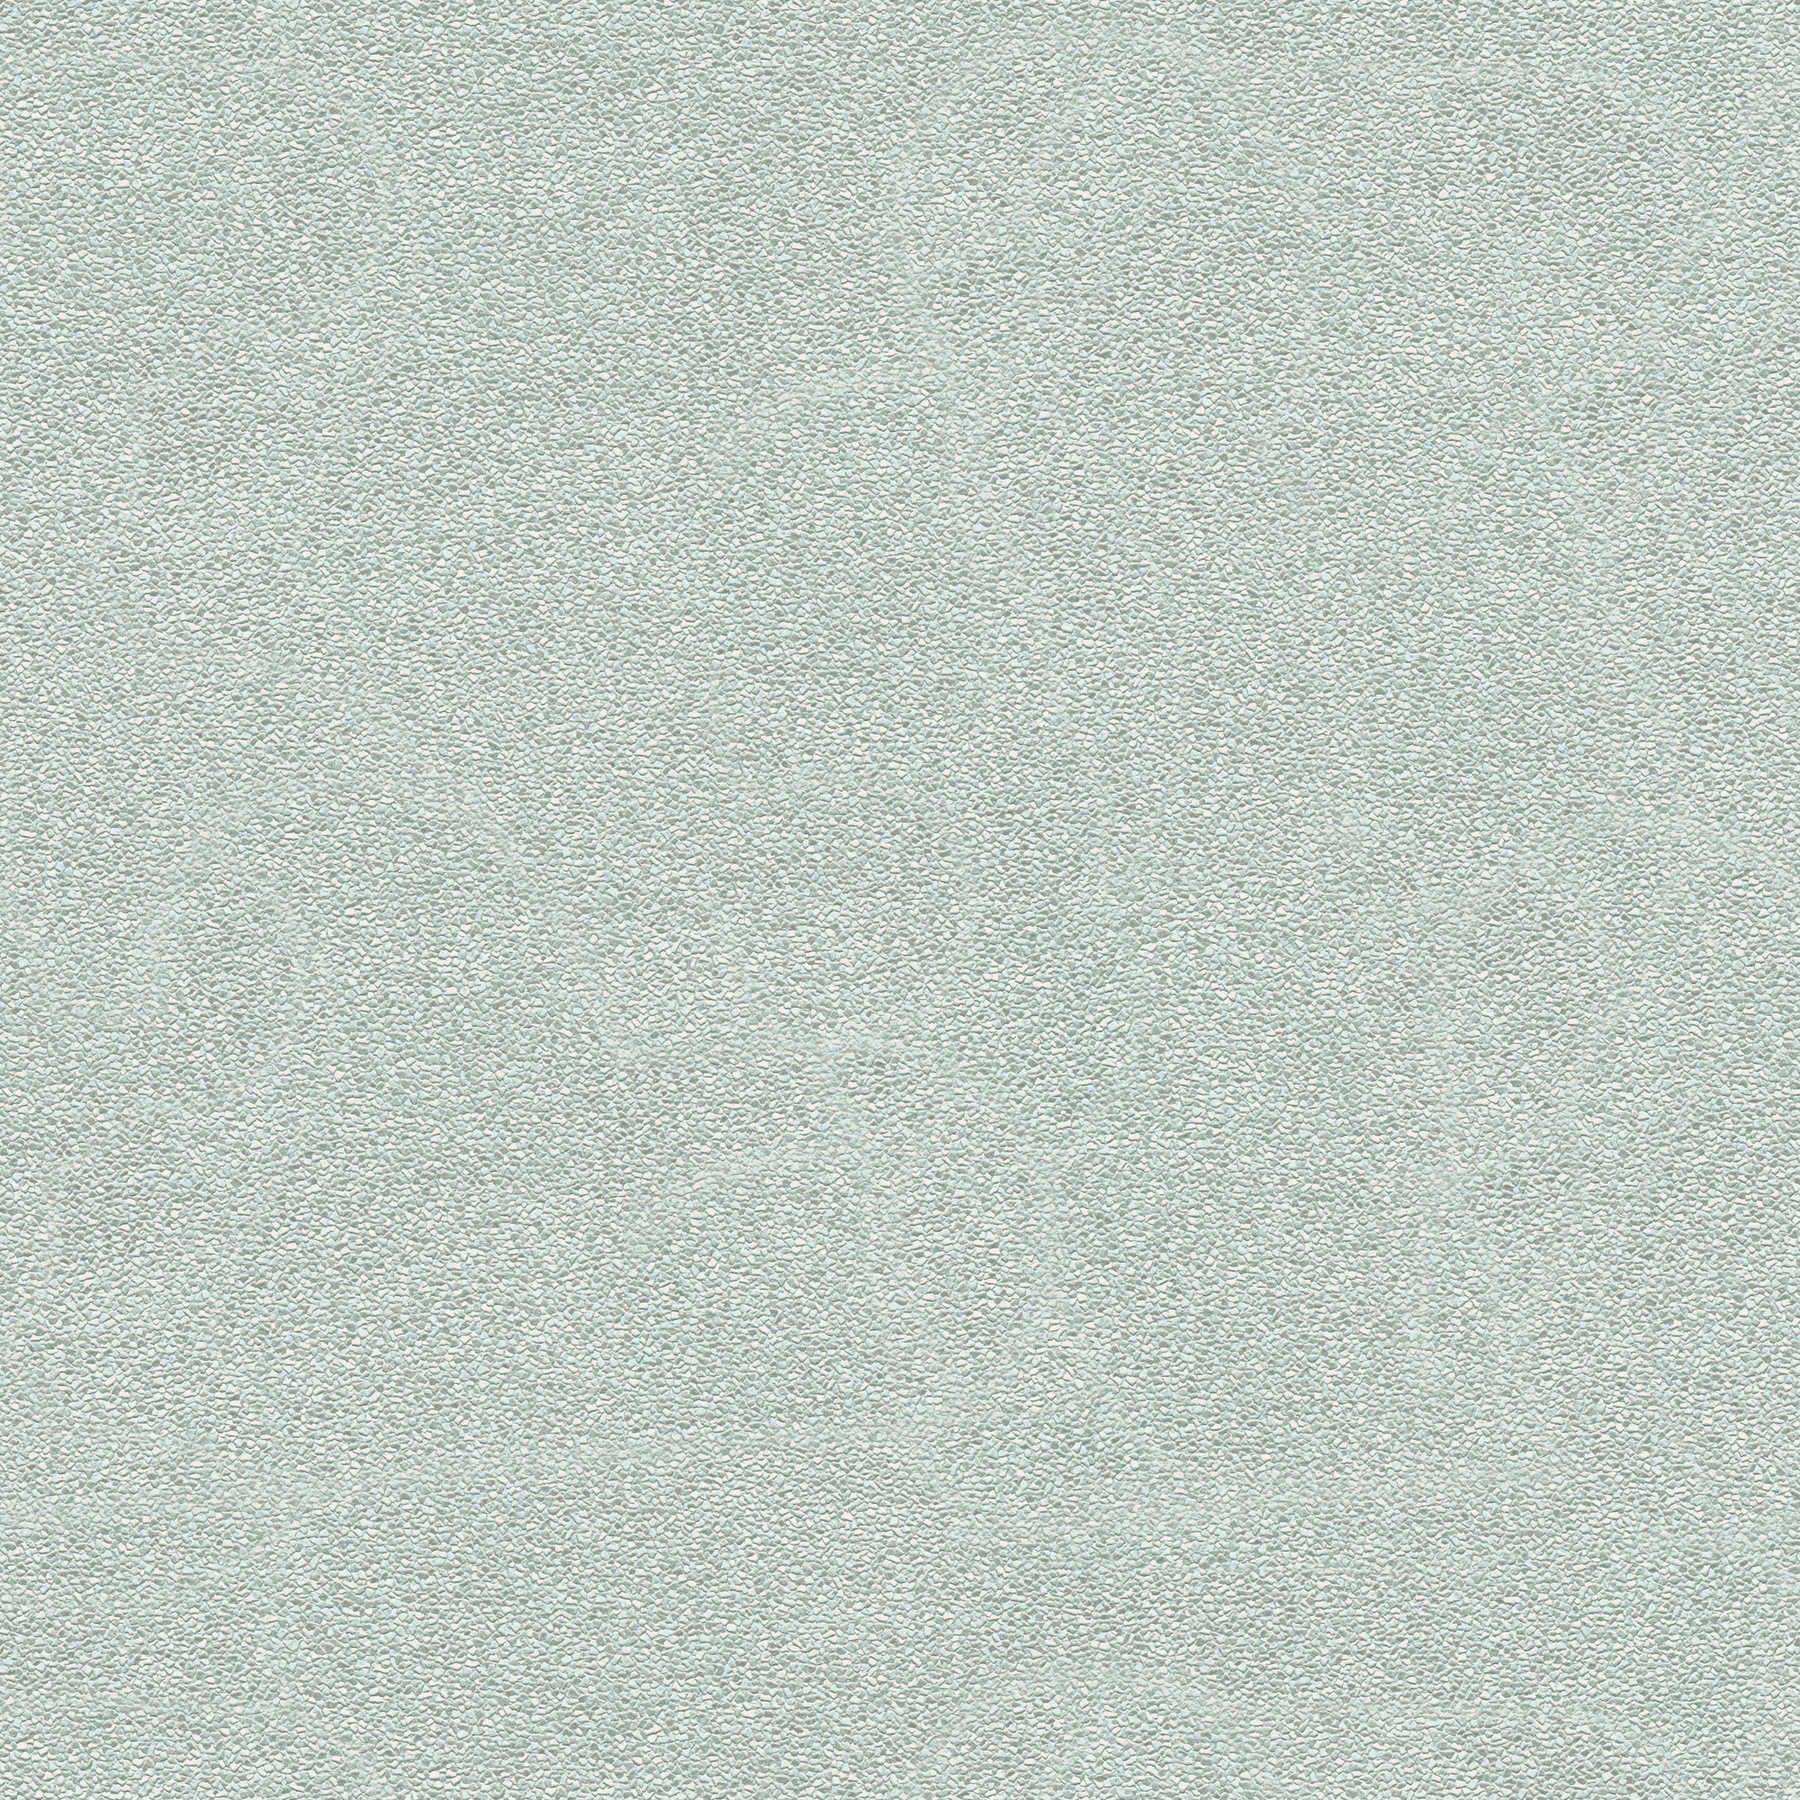 Wallpaper sand texture in grey-green with satin finish
